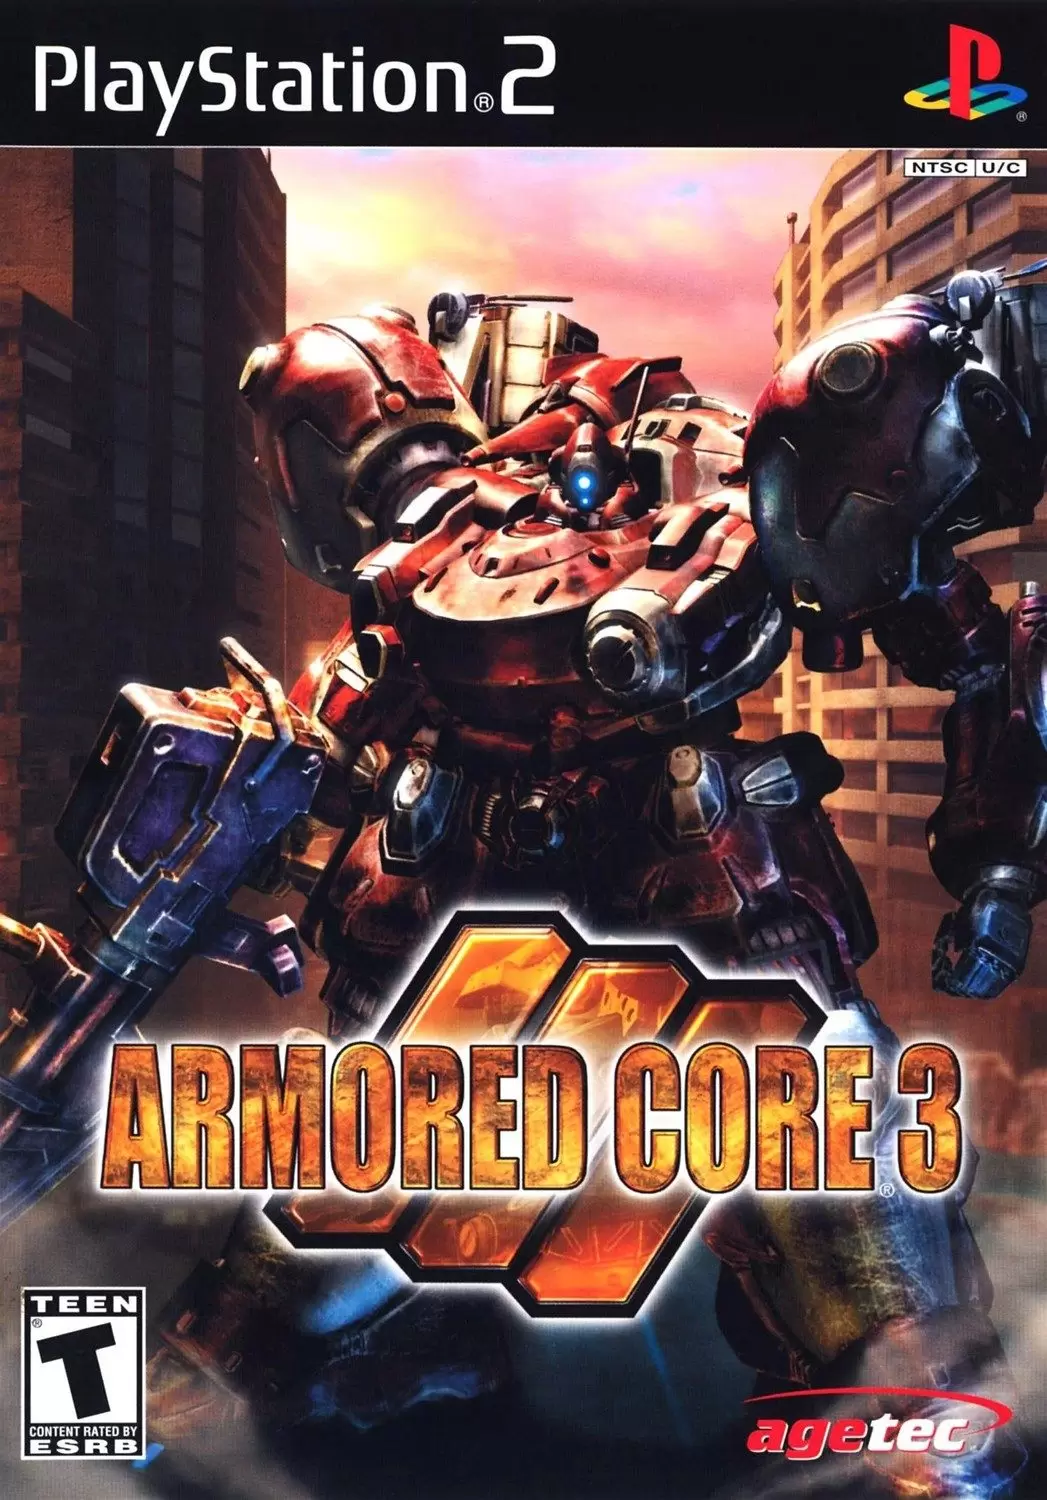 PS2 Games - Armored Core 3